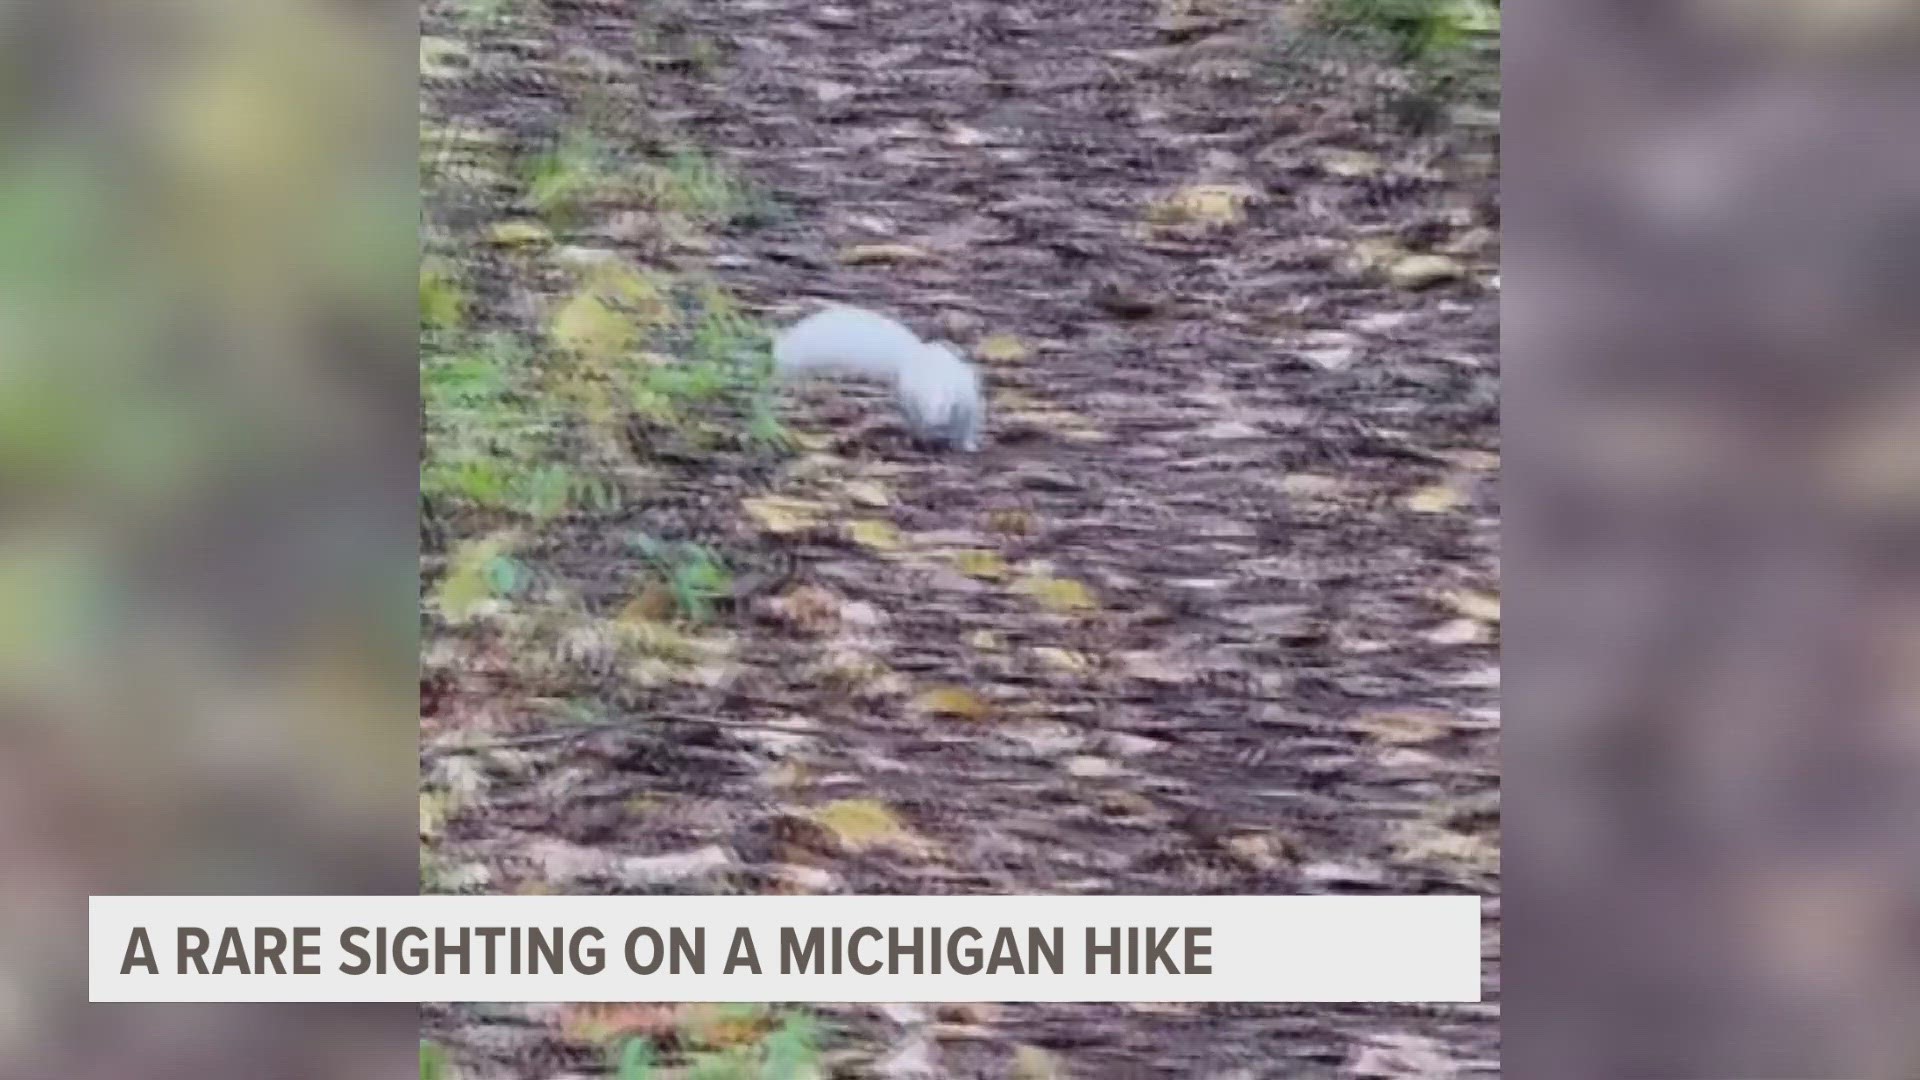 While out on a hike in Brighton, a muskegon man made a one in one hundred thousand discovery, an Albino Squirrel.